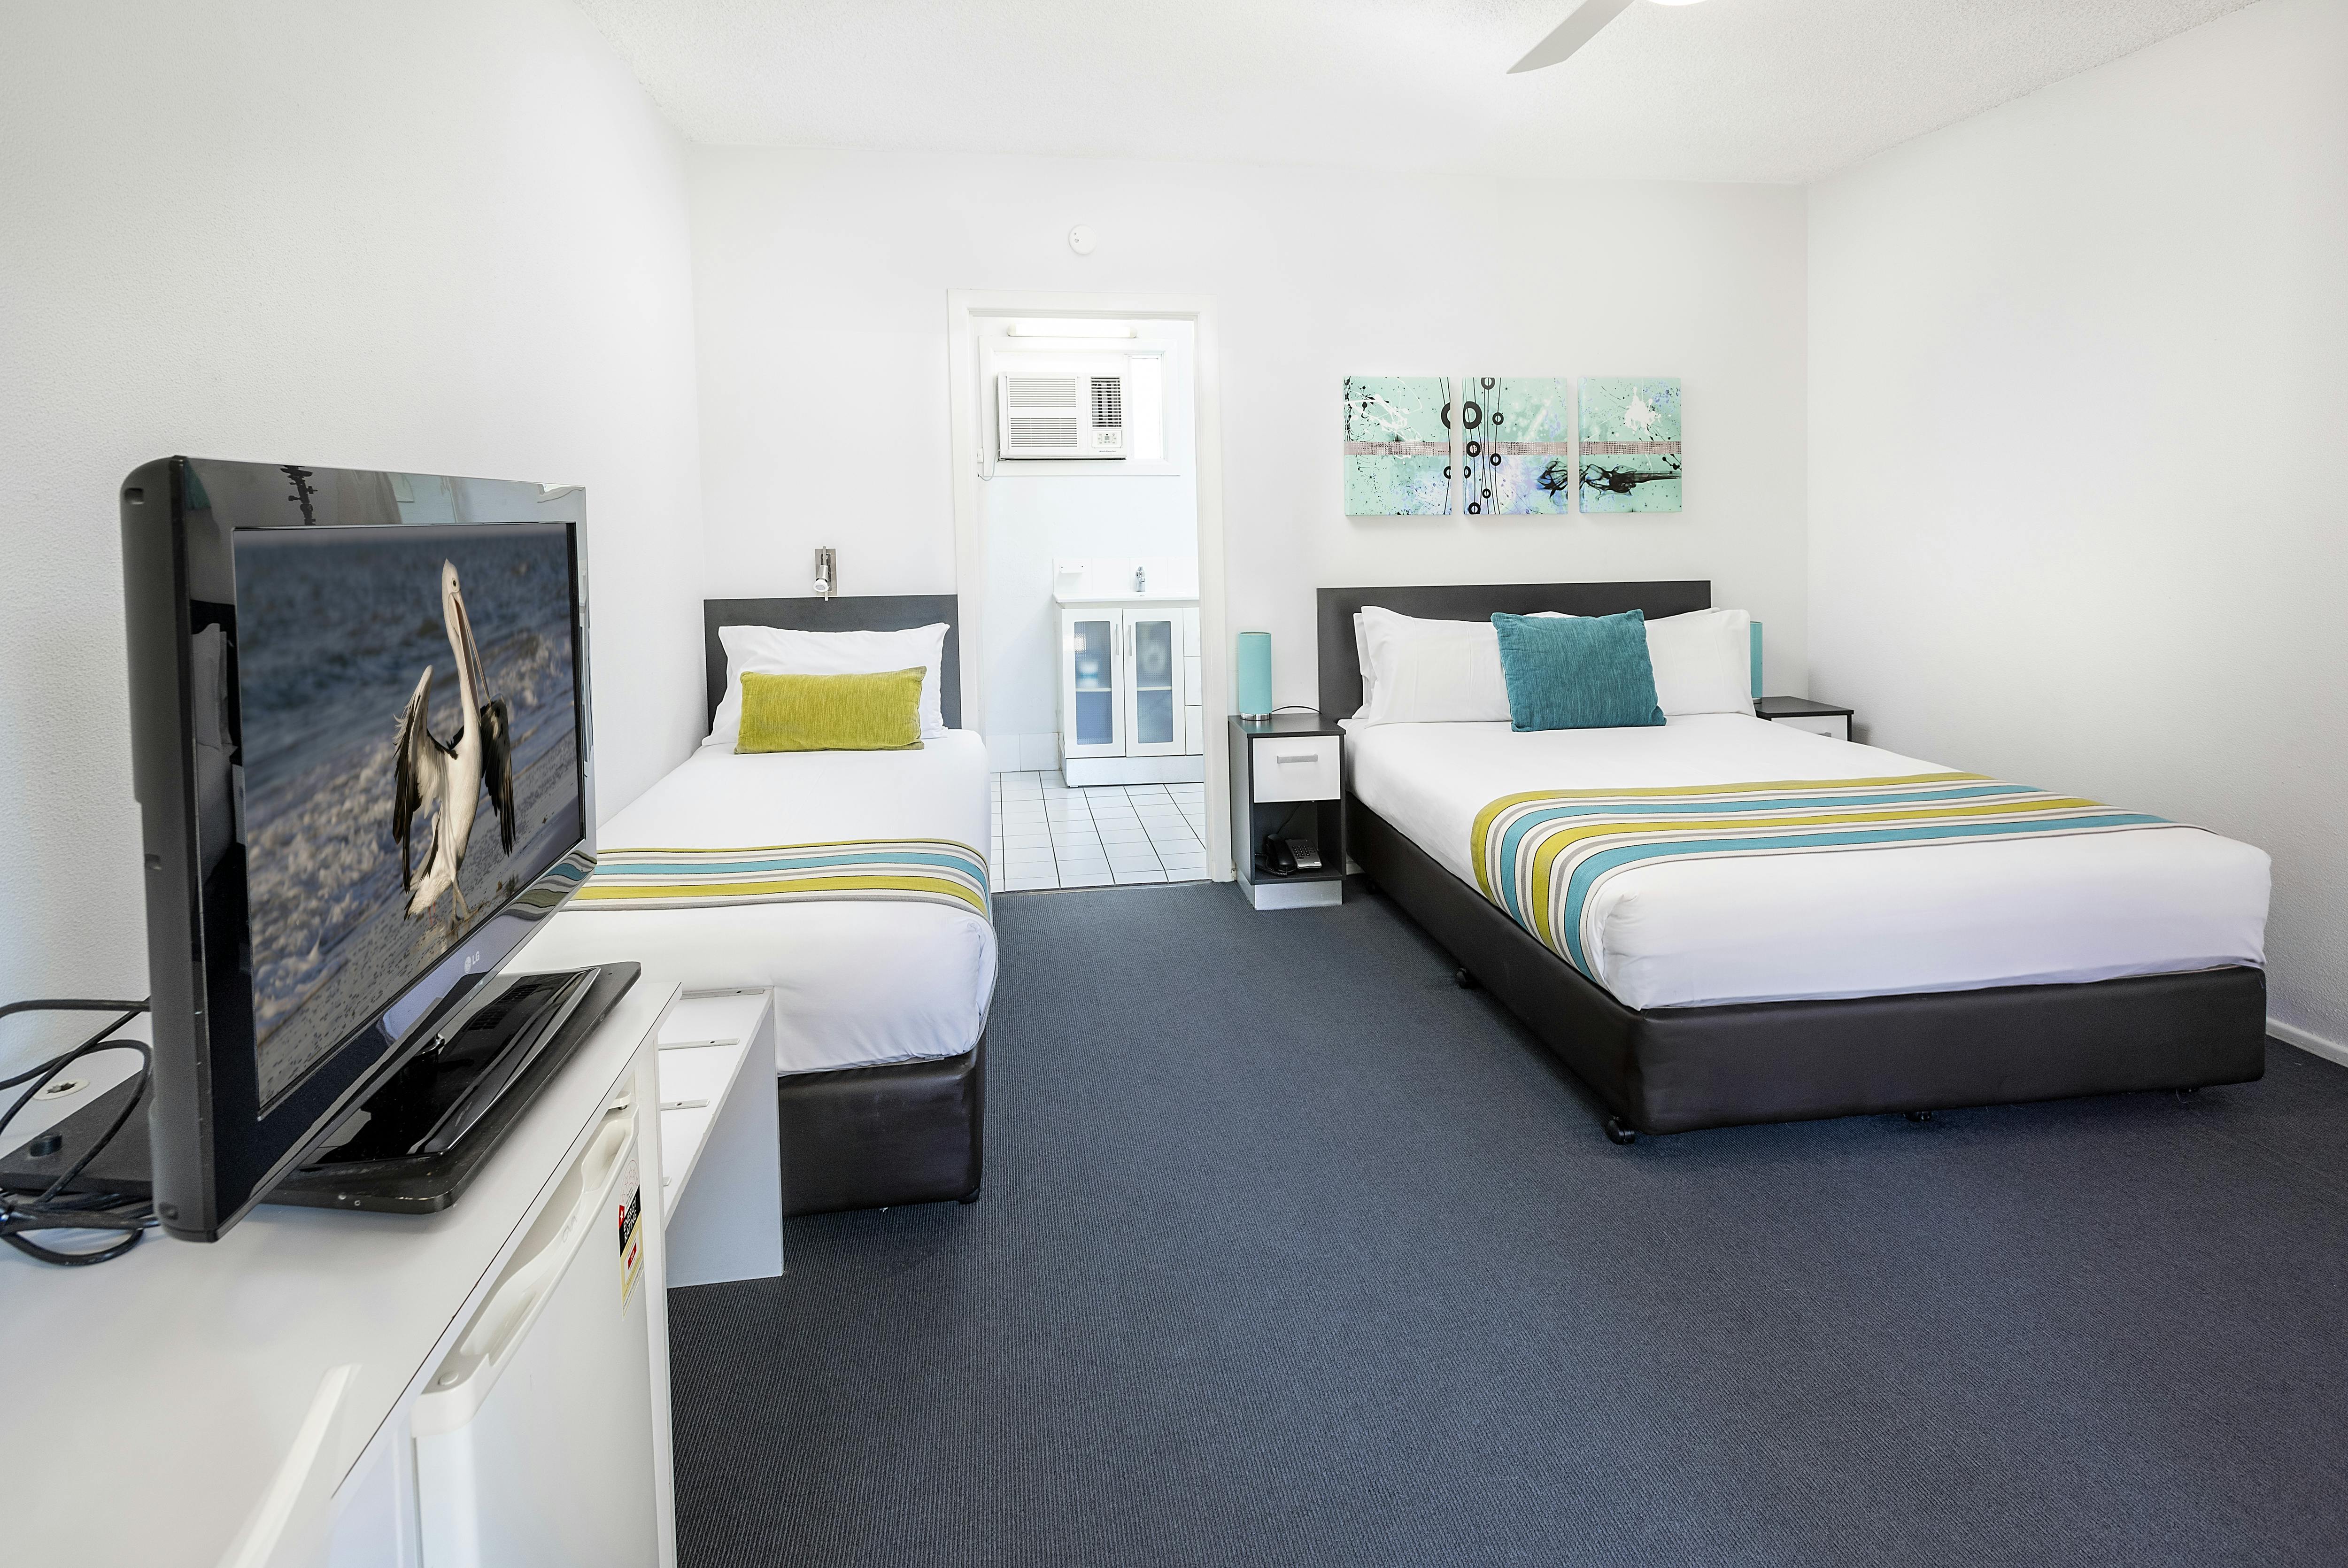 Our Standard rooms are located on the ground floor and close to the beach in Hervey Bay